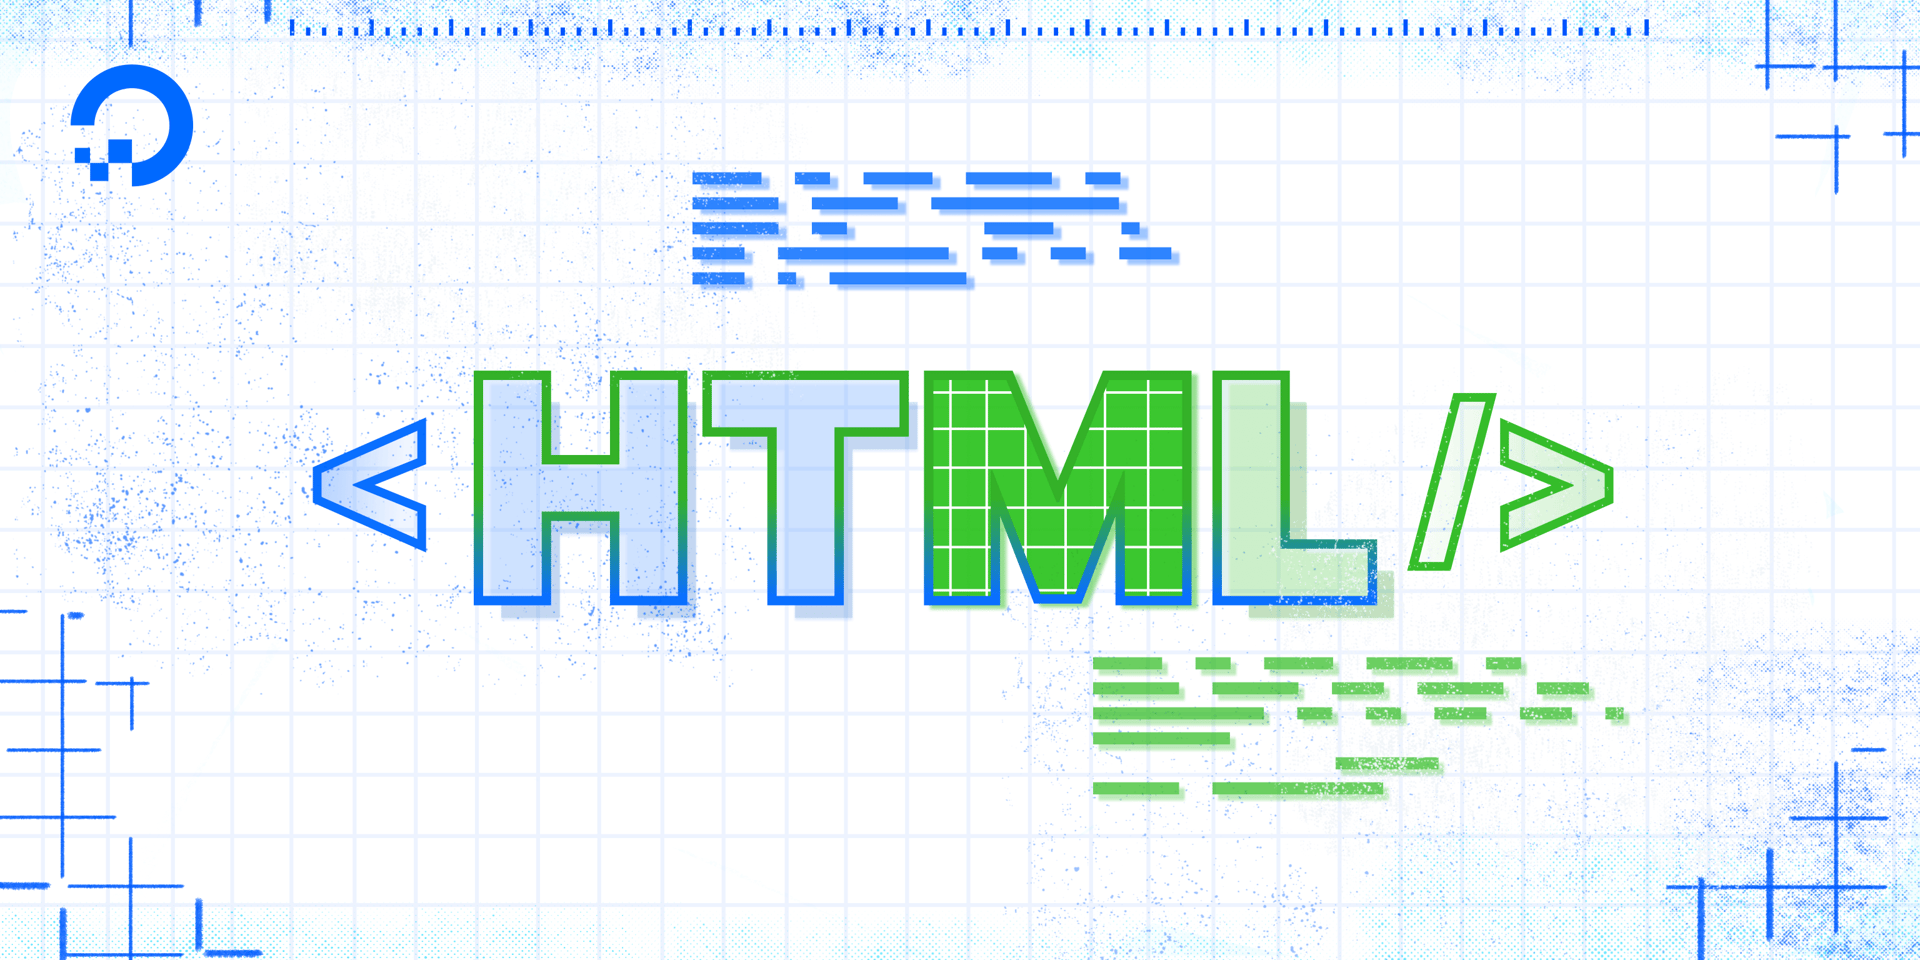 How To Style the HTML <body> Element